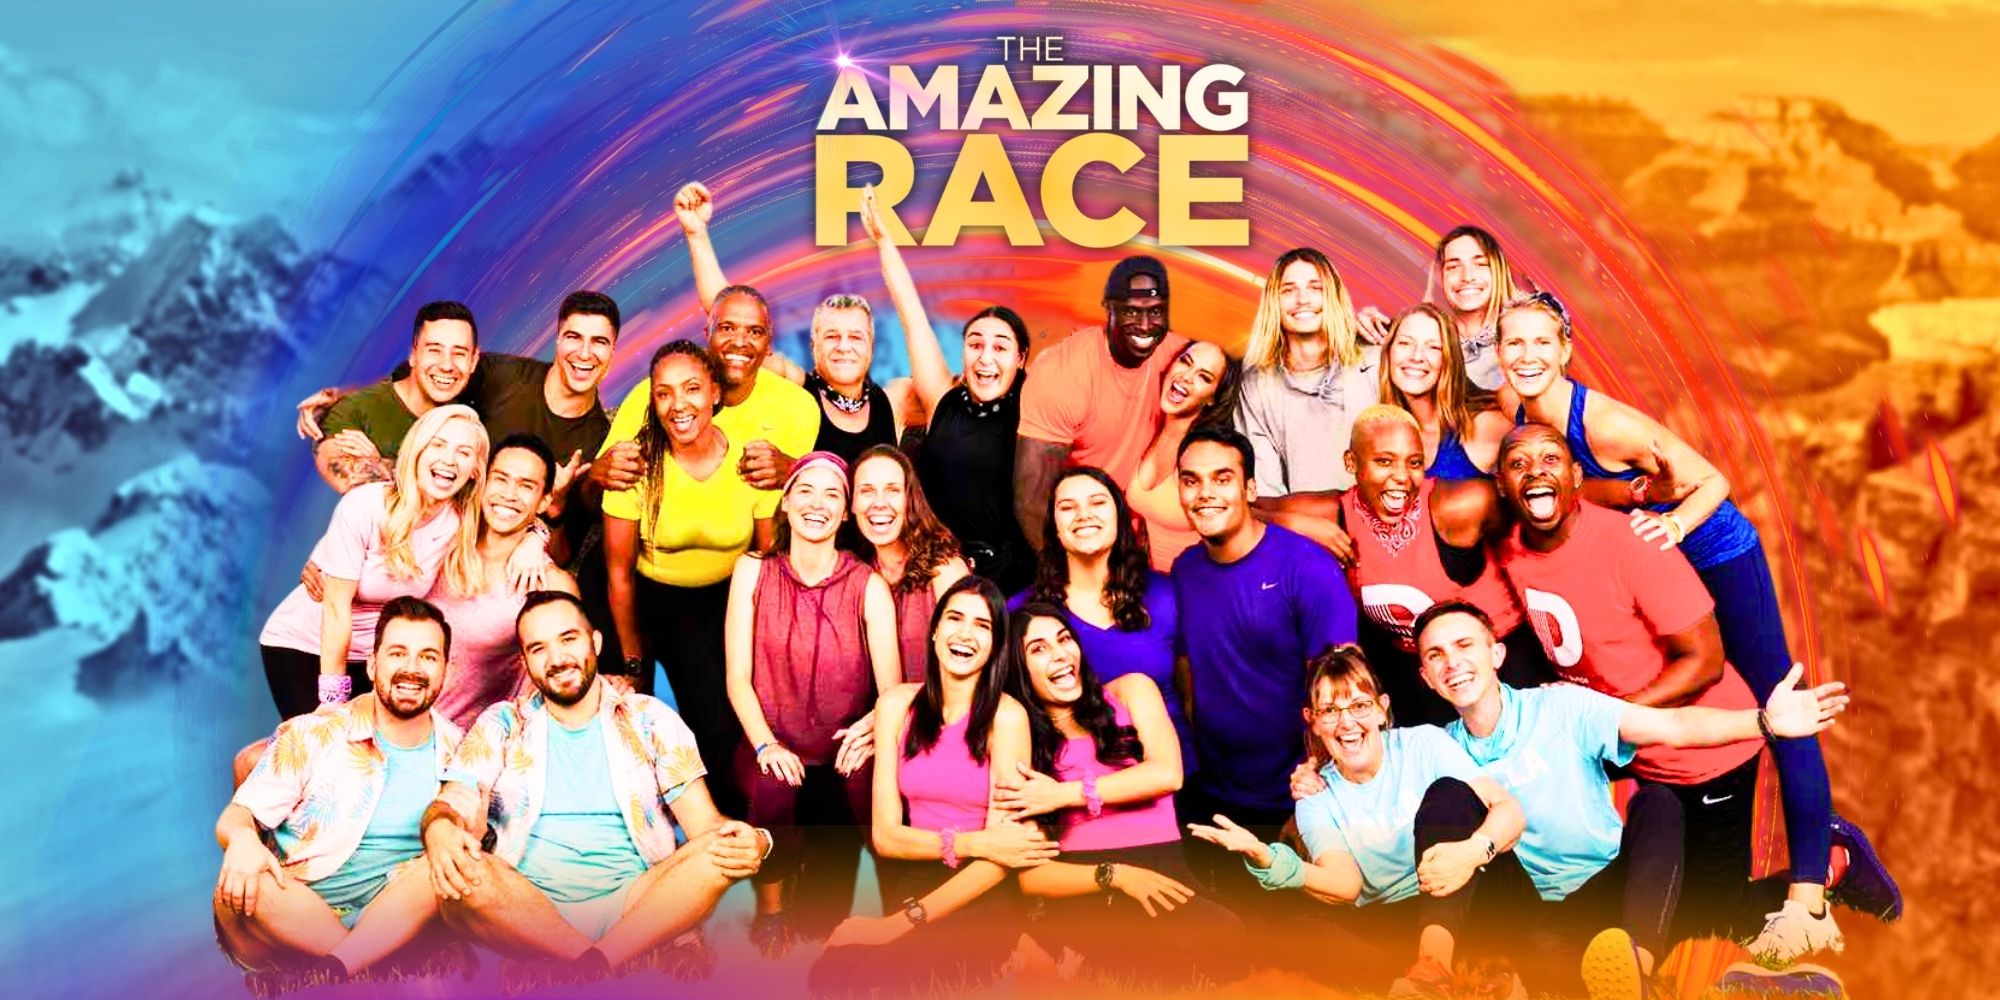 The Amazing Race Season 36 Cast posed together